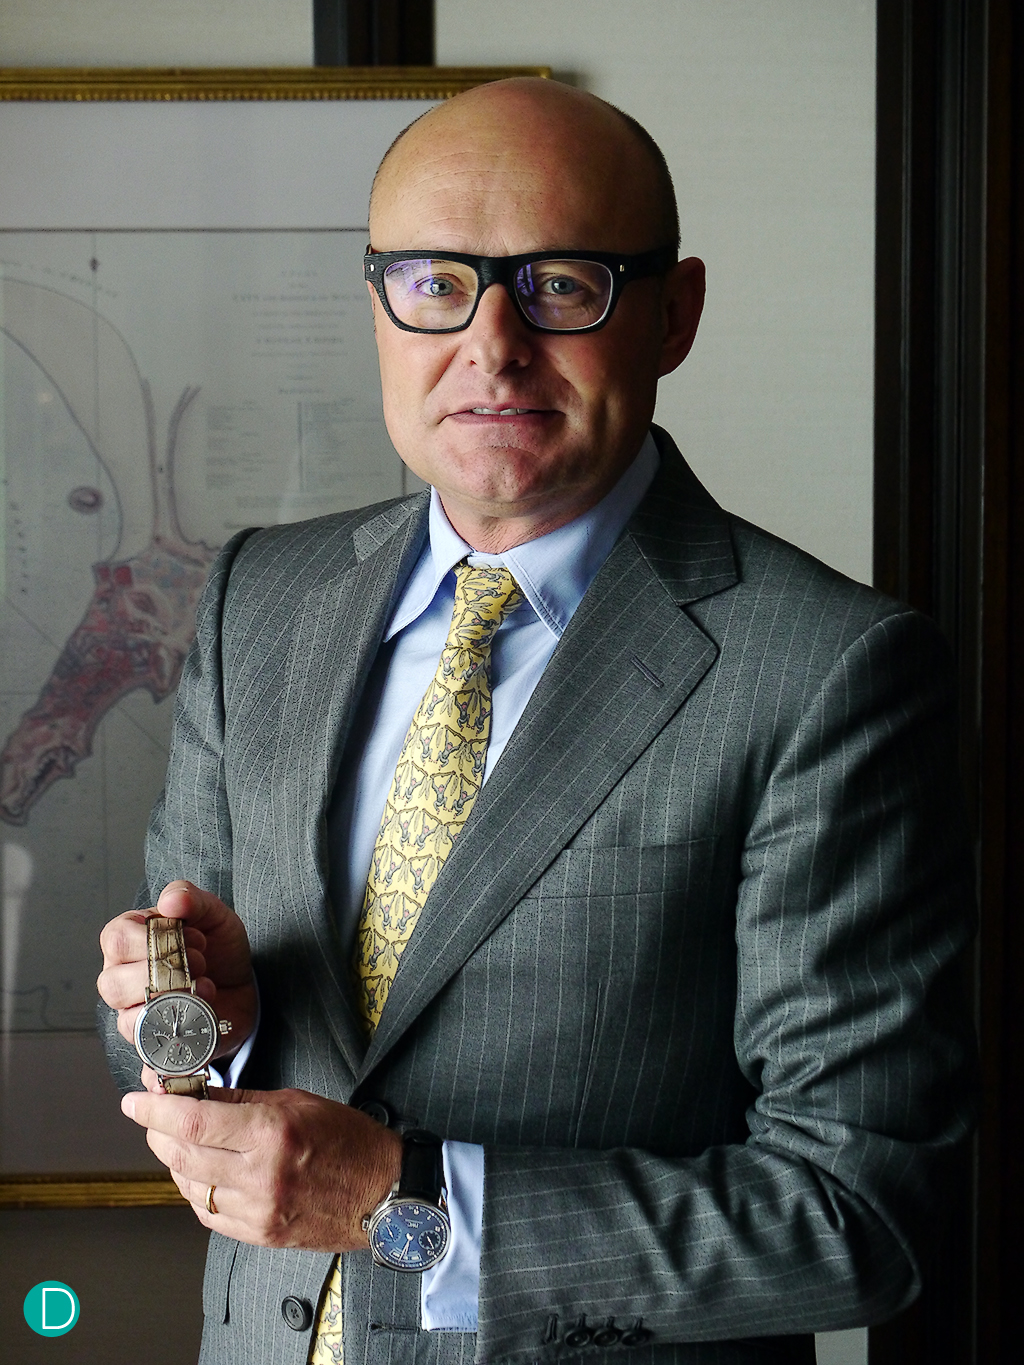 IWC CEO Georges Kern proudly showing the Portofino Monopusher Chronograph. Hong Kong, August 27, 2015.